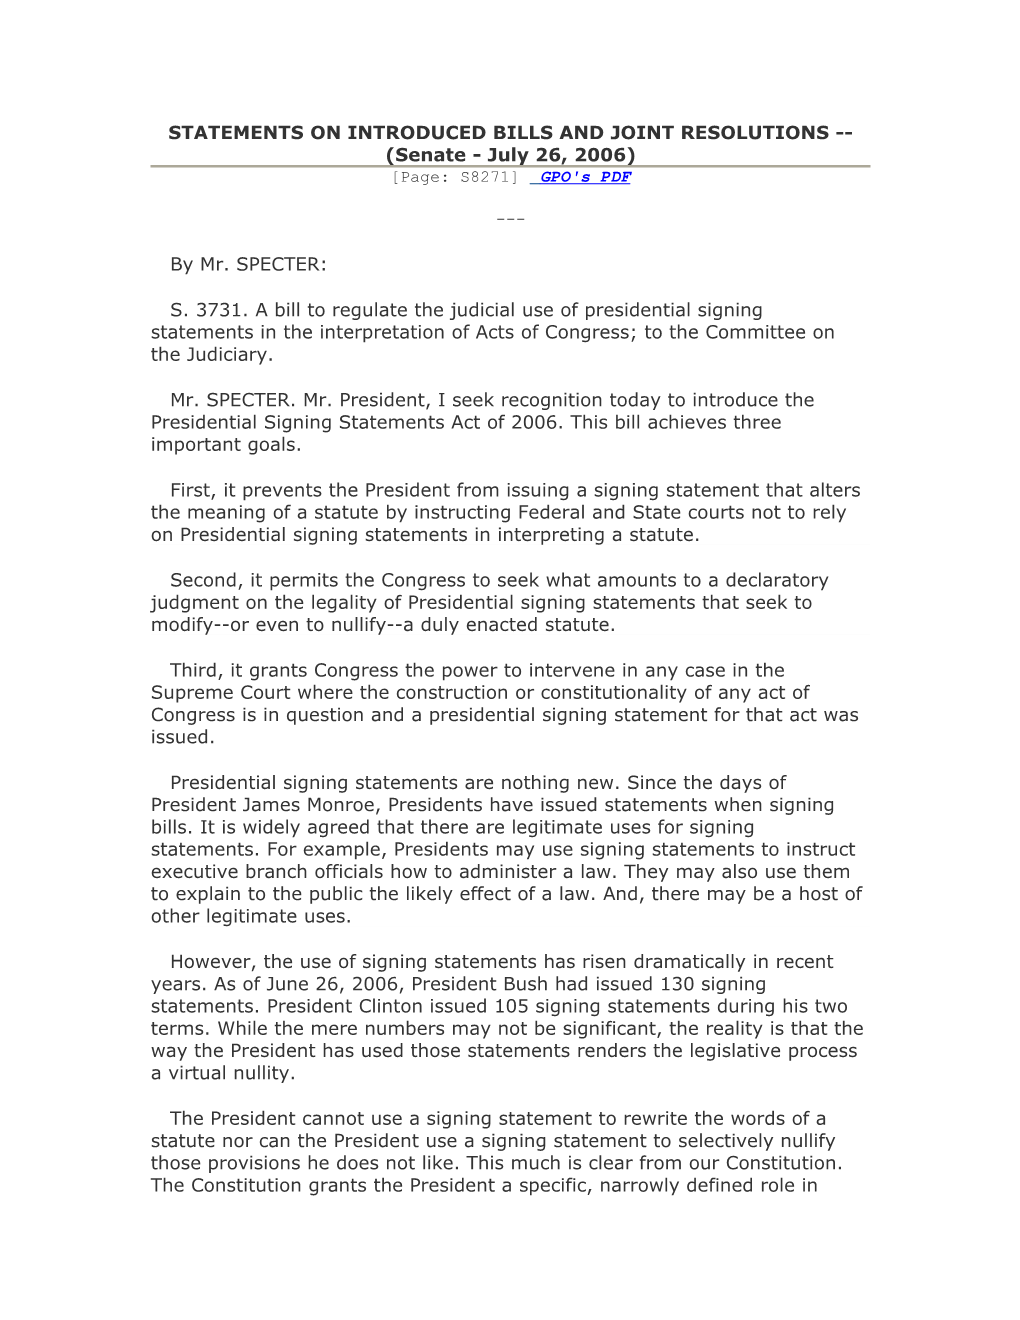 STATEMENTS on INTRODUCED BILLS and JOINT RESOLUTIONS (Senate - July 26, 2006)